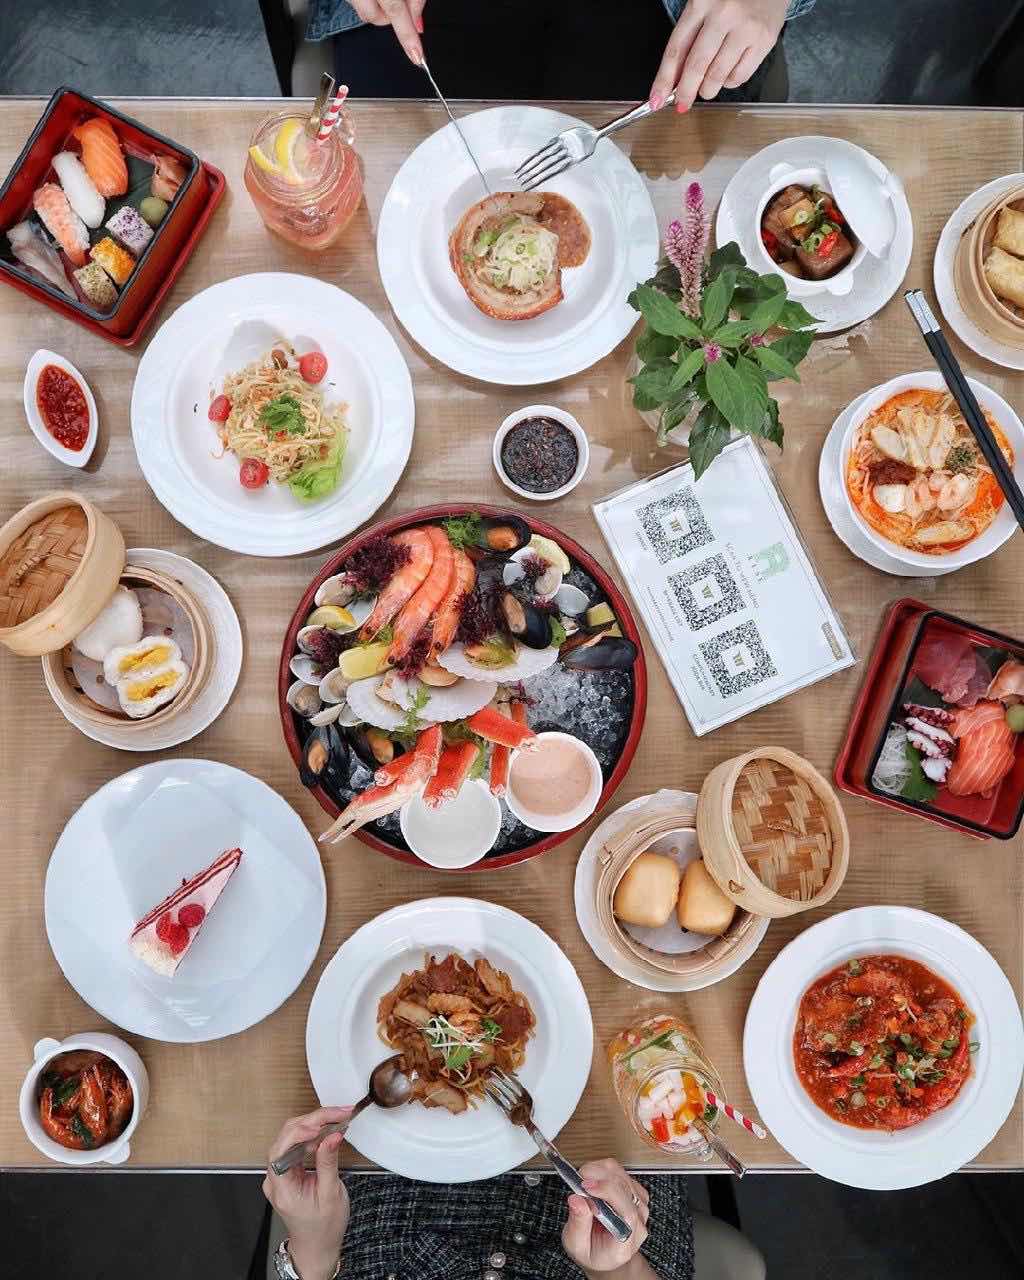 1-FOR-1 Lunch & Dinner Buffet @ RISE Marina Bay Sands! – Shout